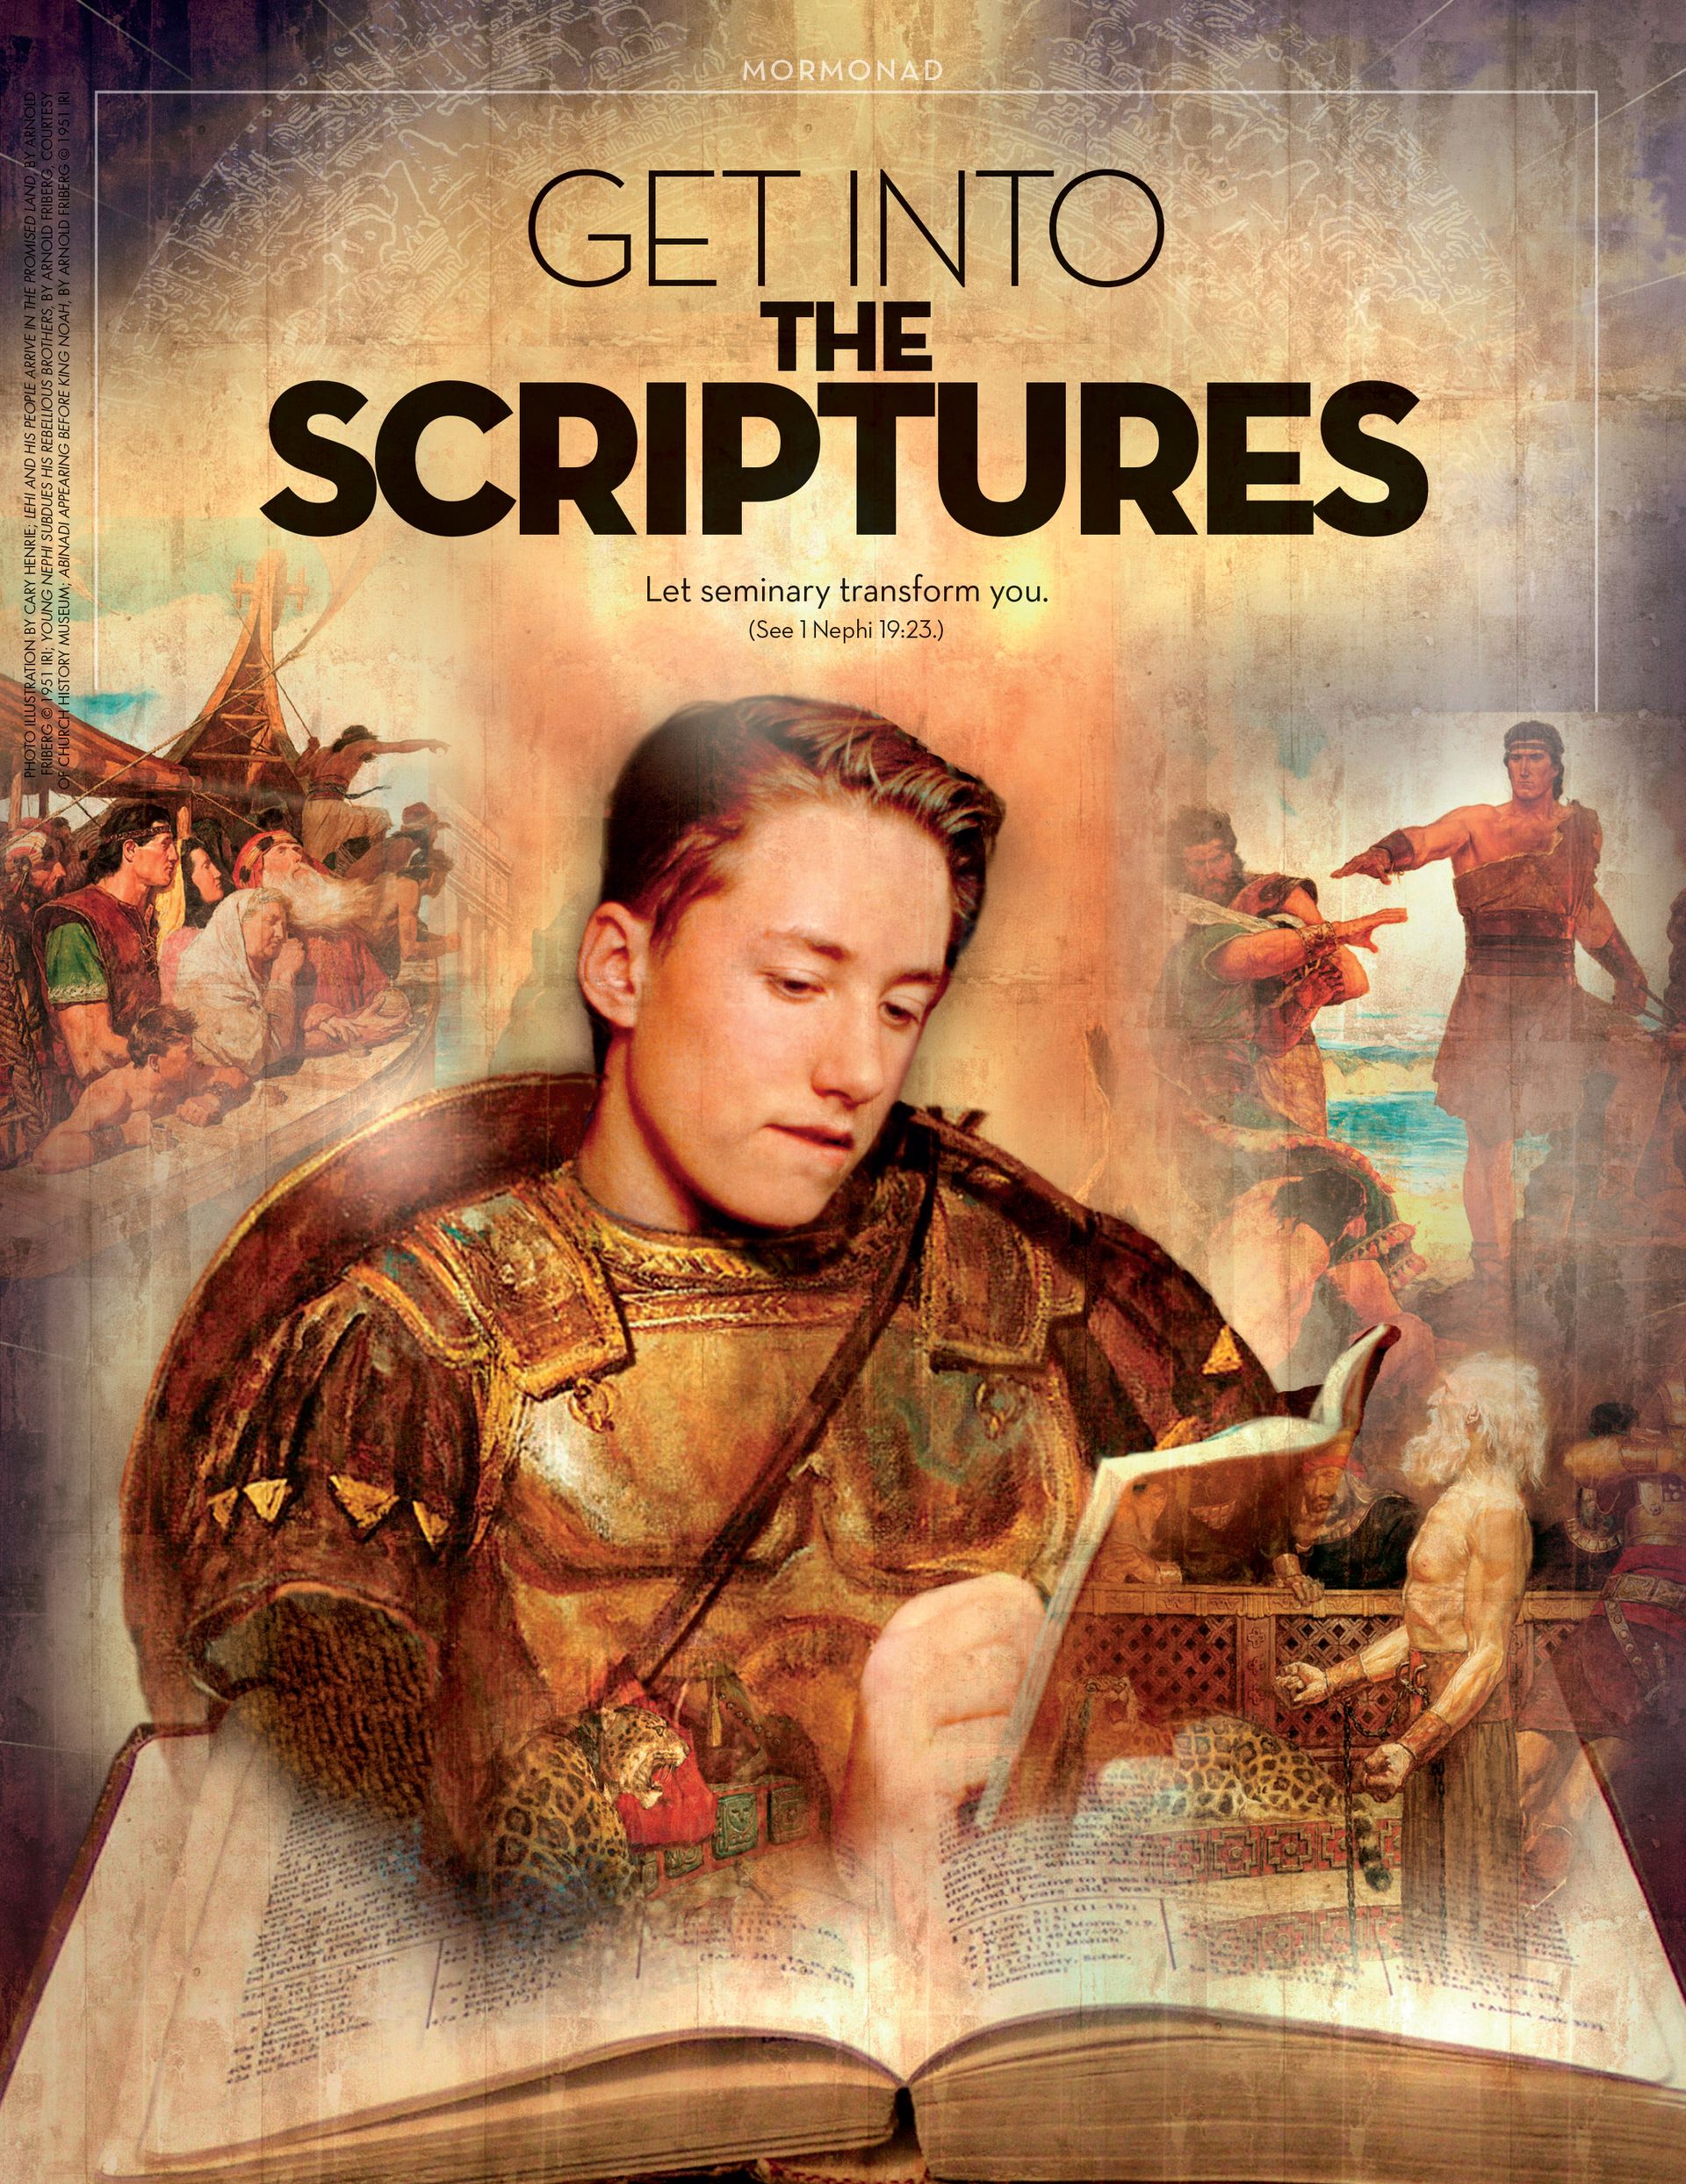 Get into the Scriptures. Let seminary transform you. (See 1 Nephi 19:23.) Apr. 2012 © undefined ipCode 1.